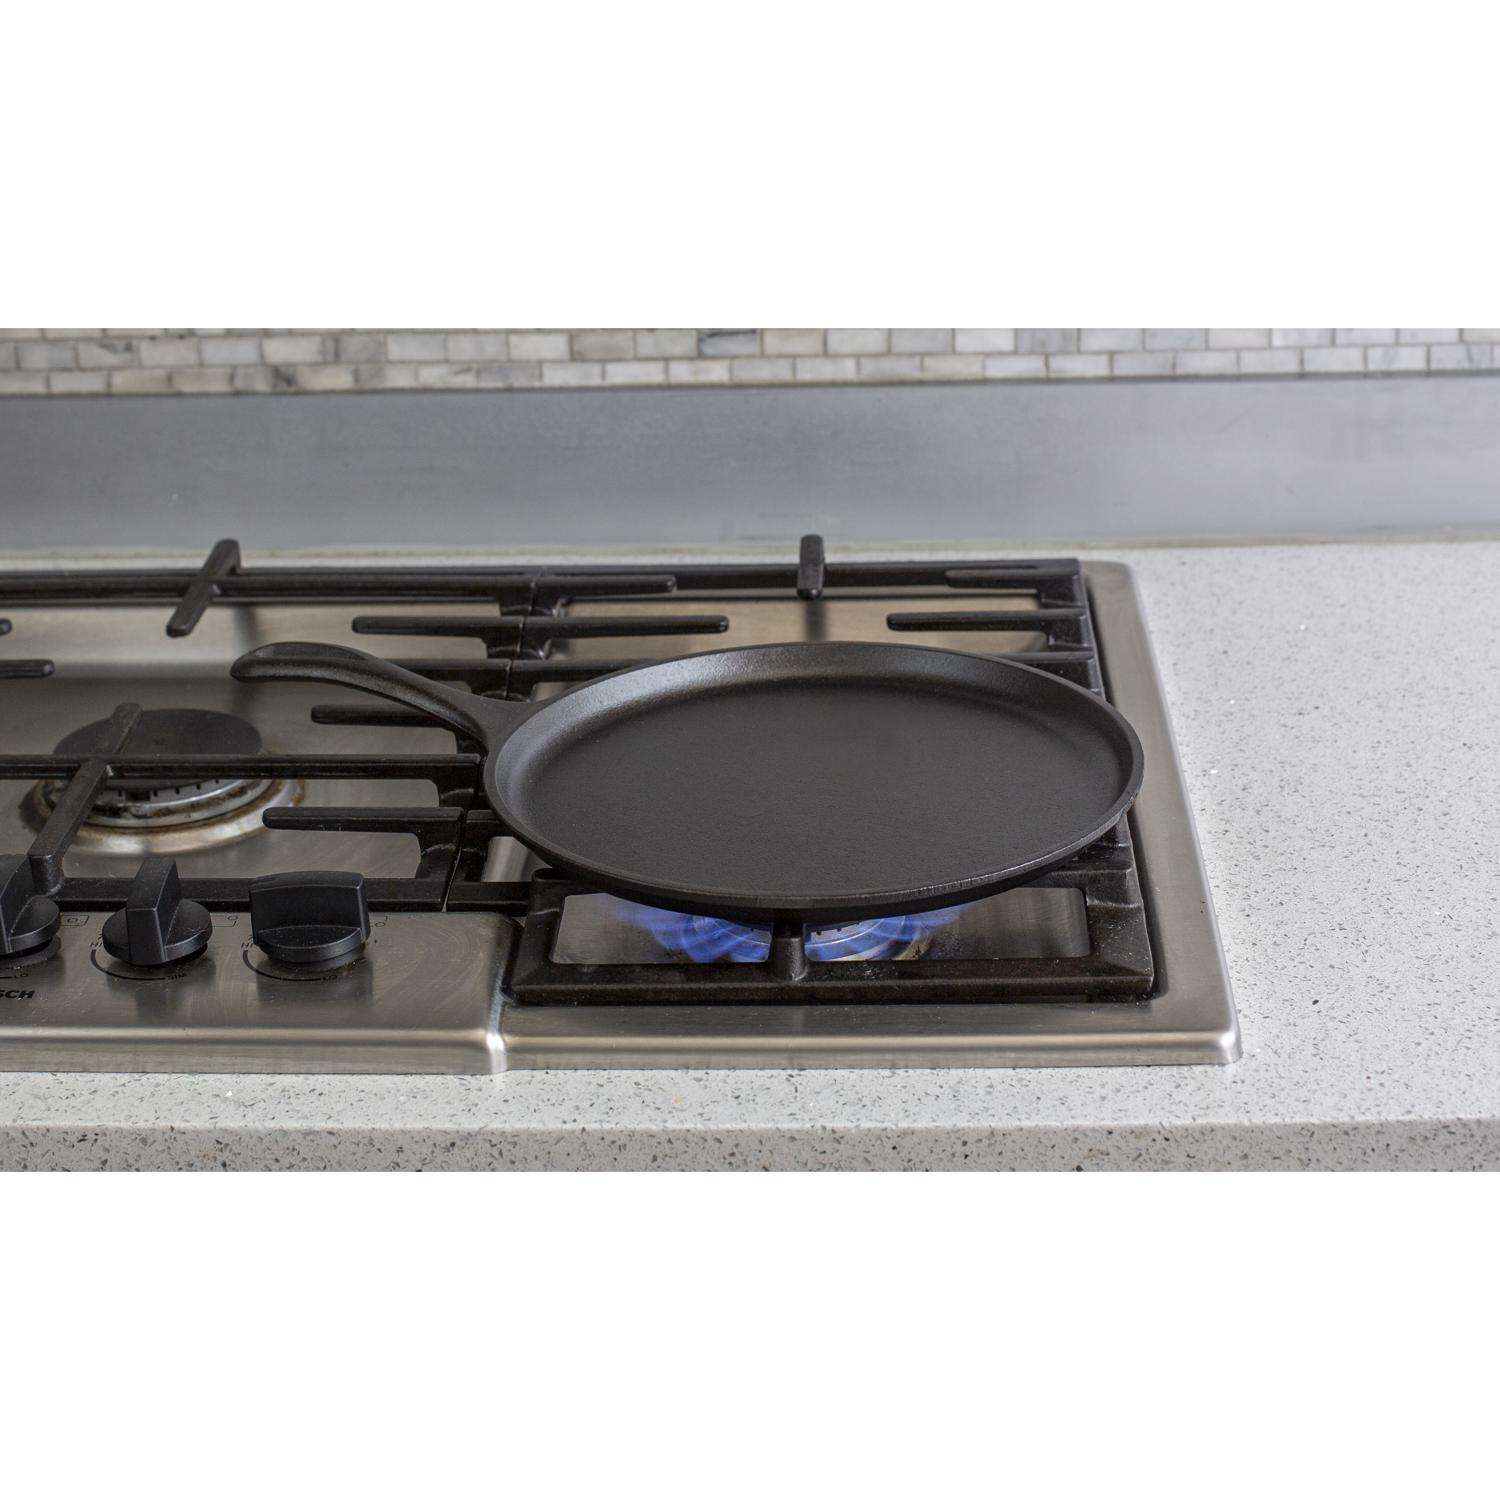 DASH 4 Mini (Leaf) Maker Round Griddle for Individual Pancakes